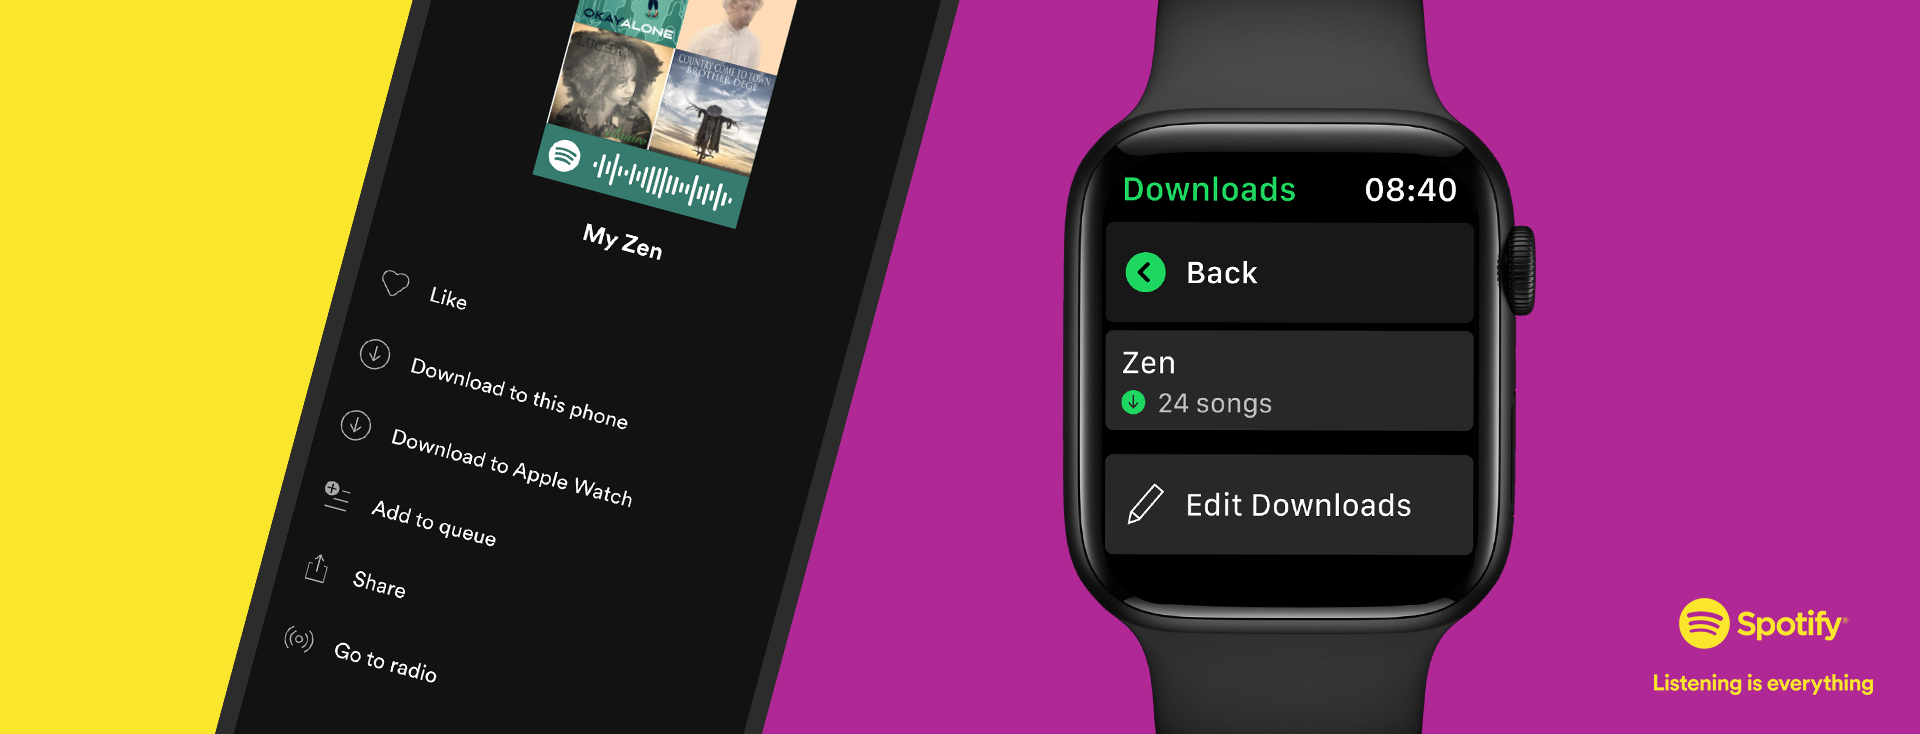 Spotify for Apple Watch finally adds offline support for music and podcasts